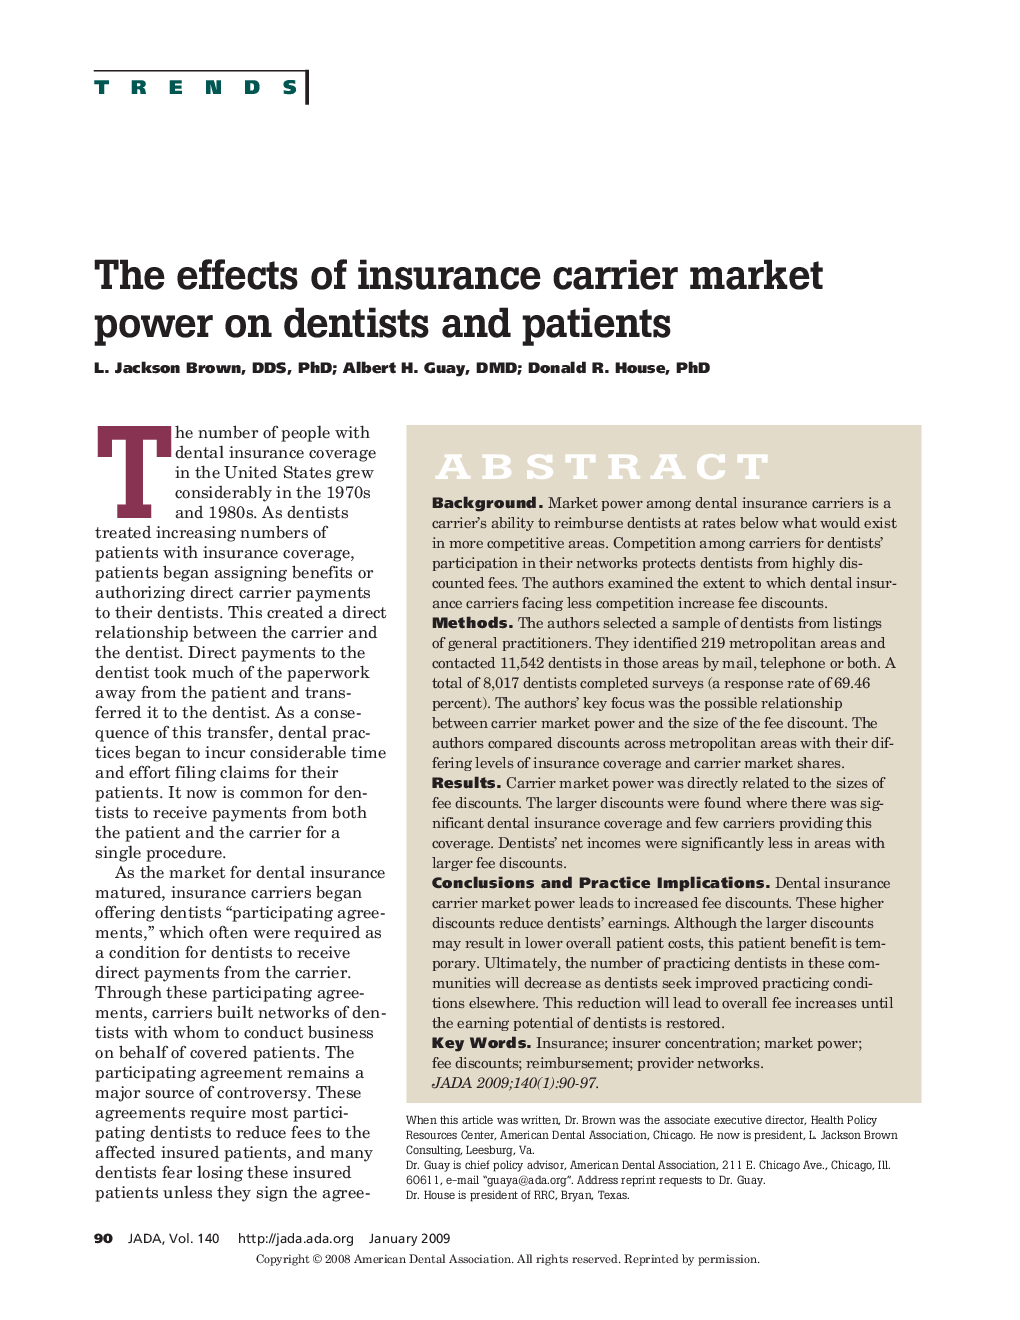 The effects of insurance carrier market power on dentists and patients